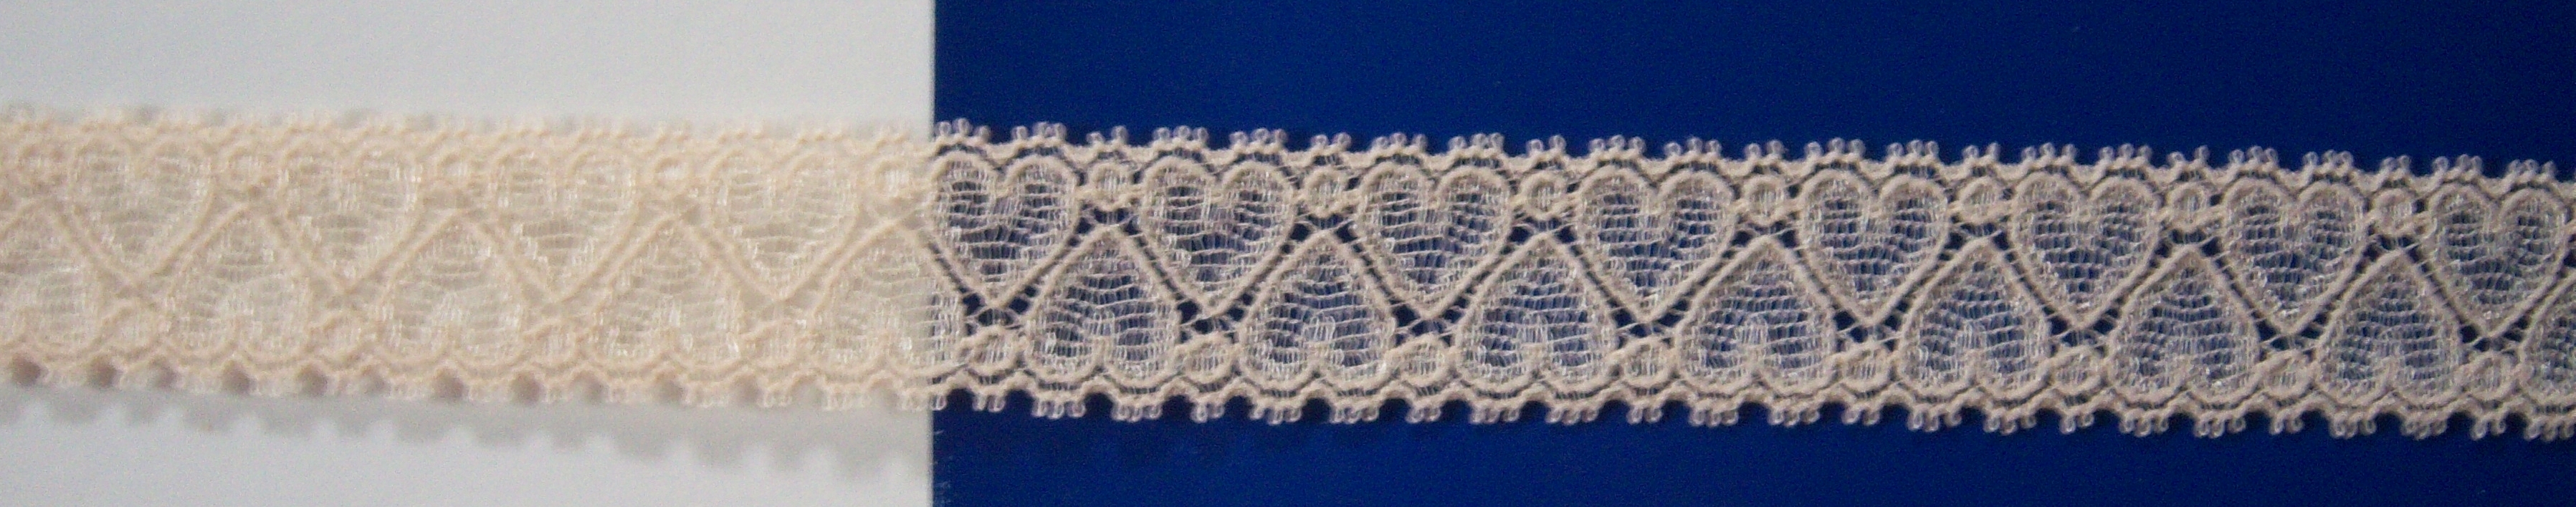 Beige Hearts 1" Stretch Lace